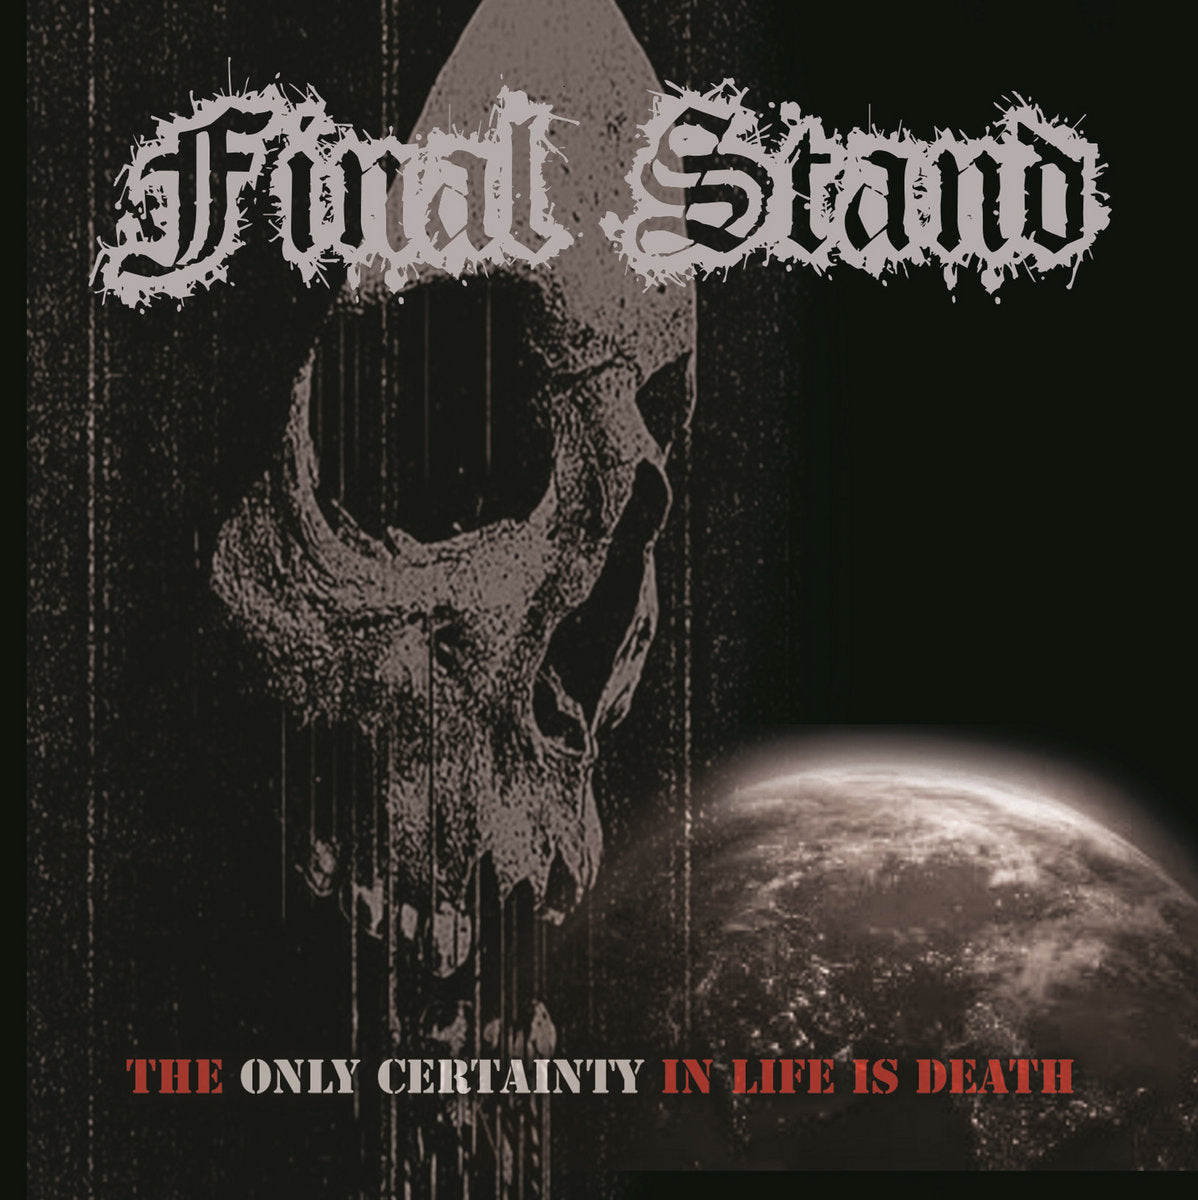 Final Stand "The Only Certainty In Life Is Death" CD